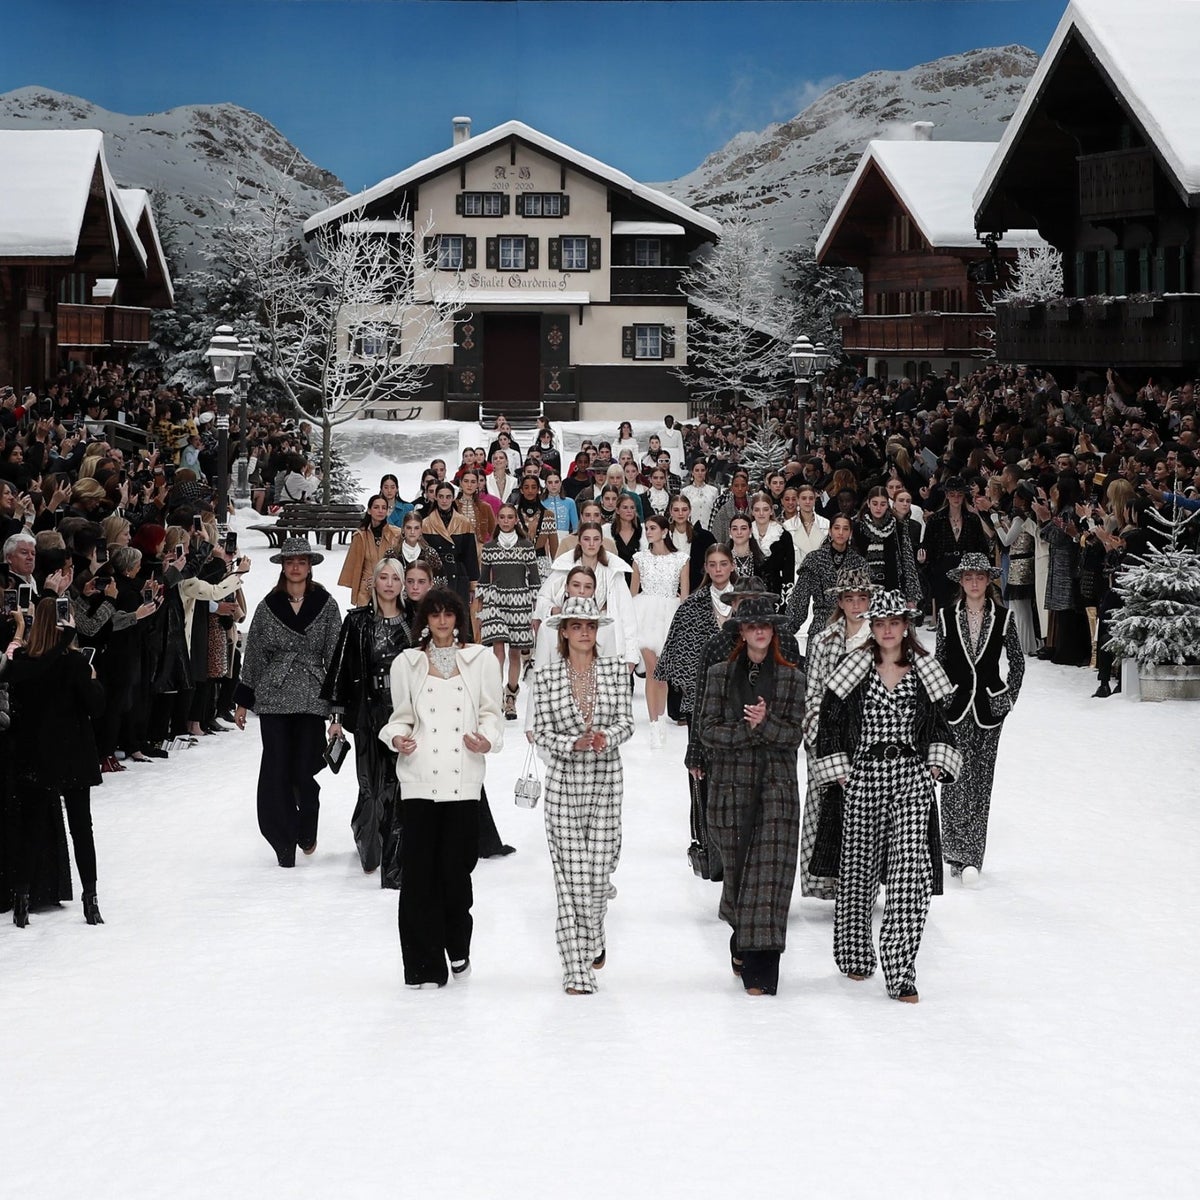 Karl Lagerfeld: Chanel's most memorable runway sets curated by the